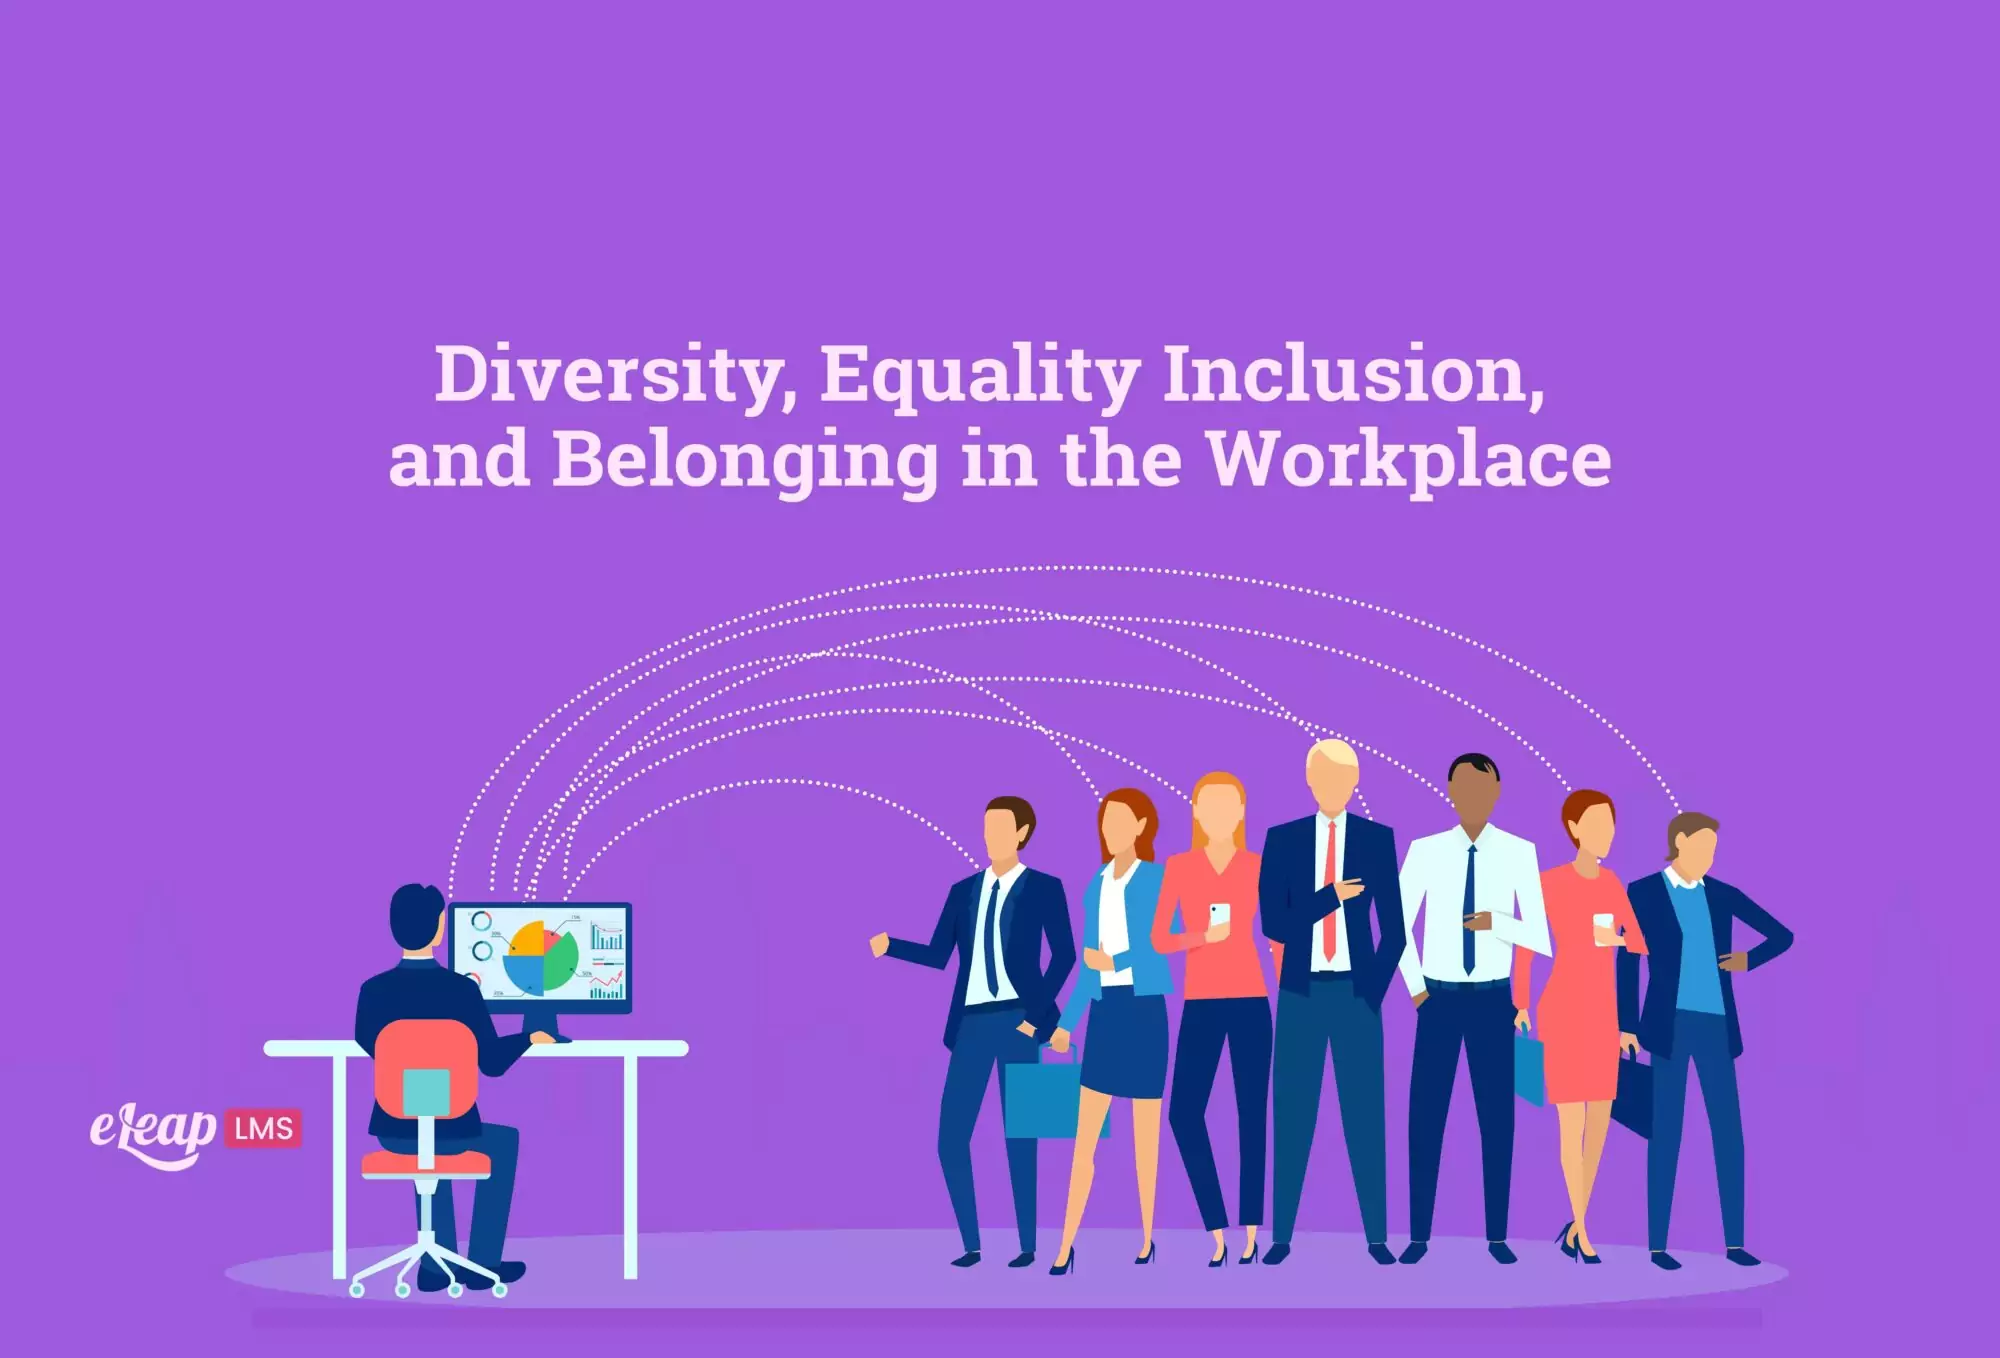 Diversity, Equality Inclusion, and Belonging in the Workplace